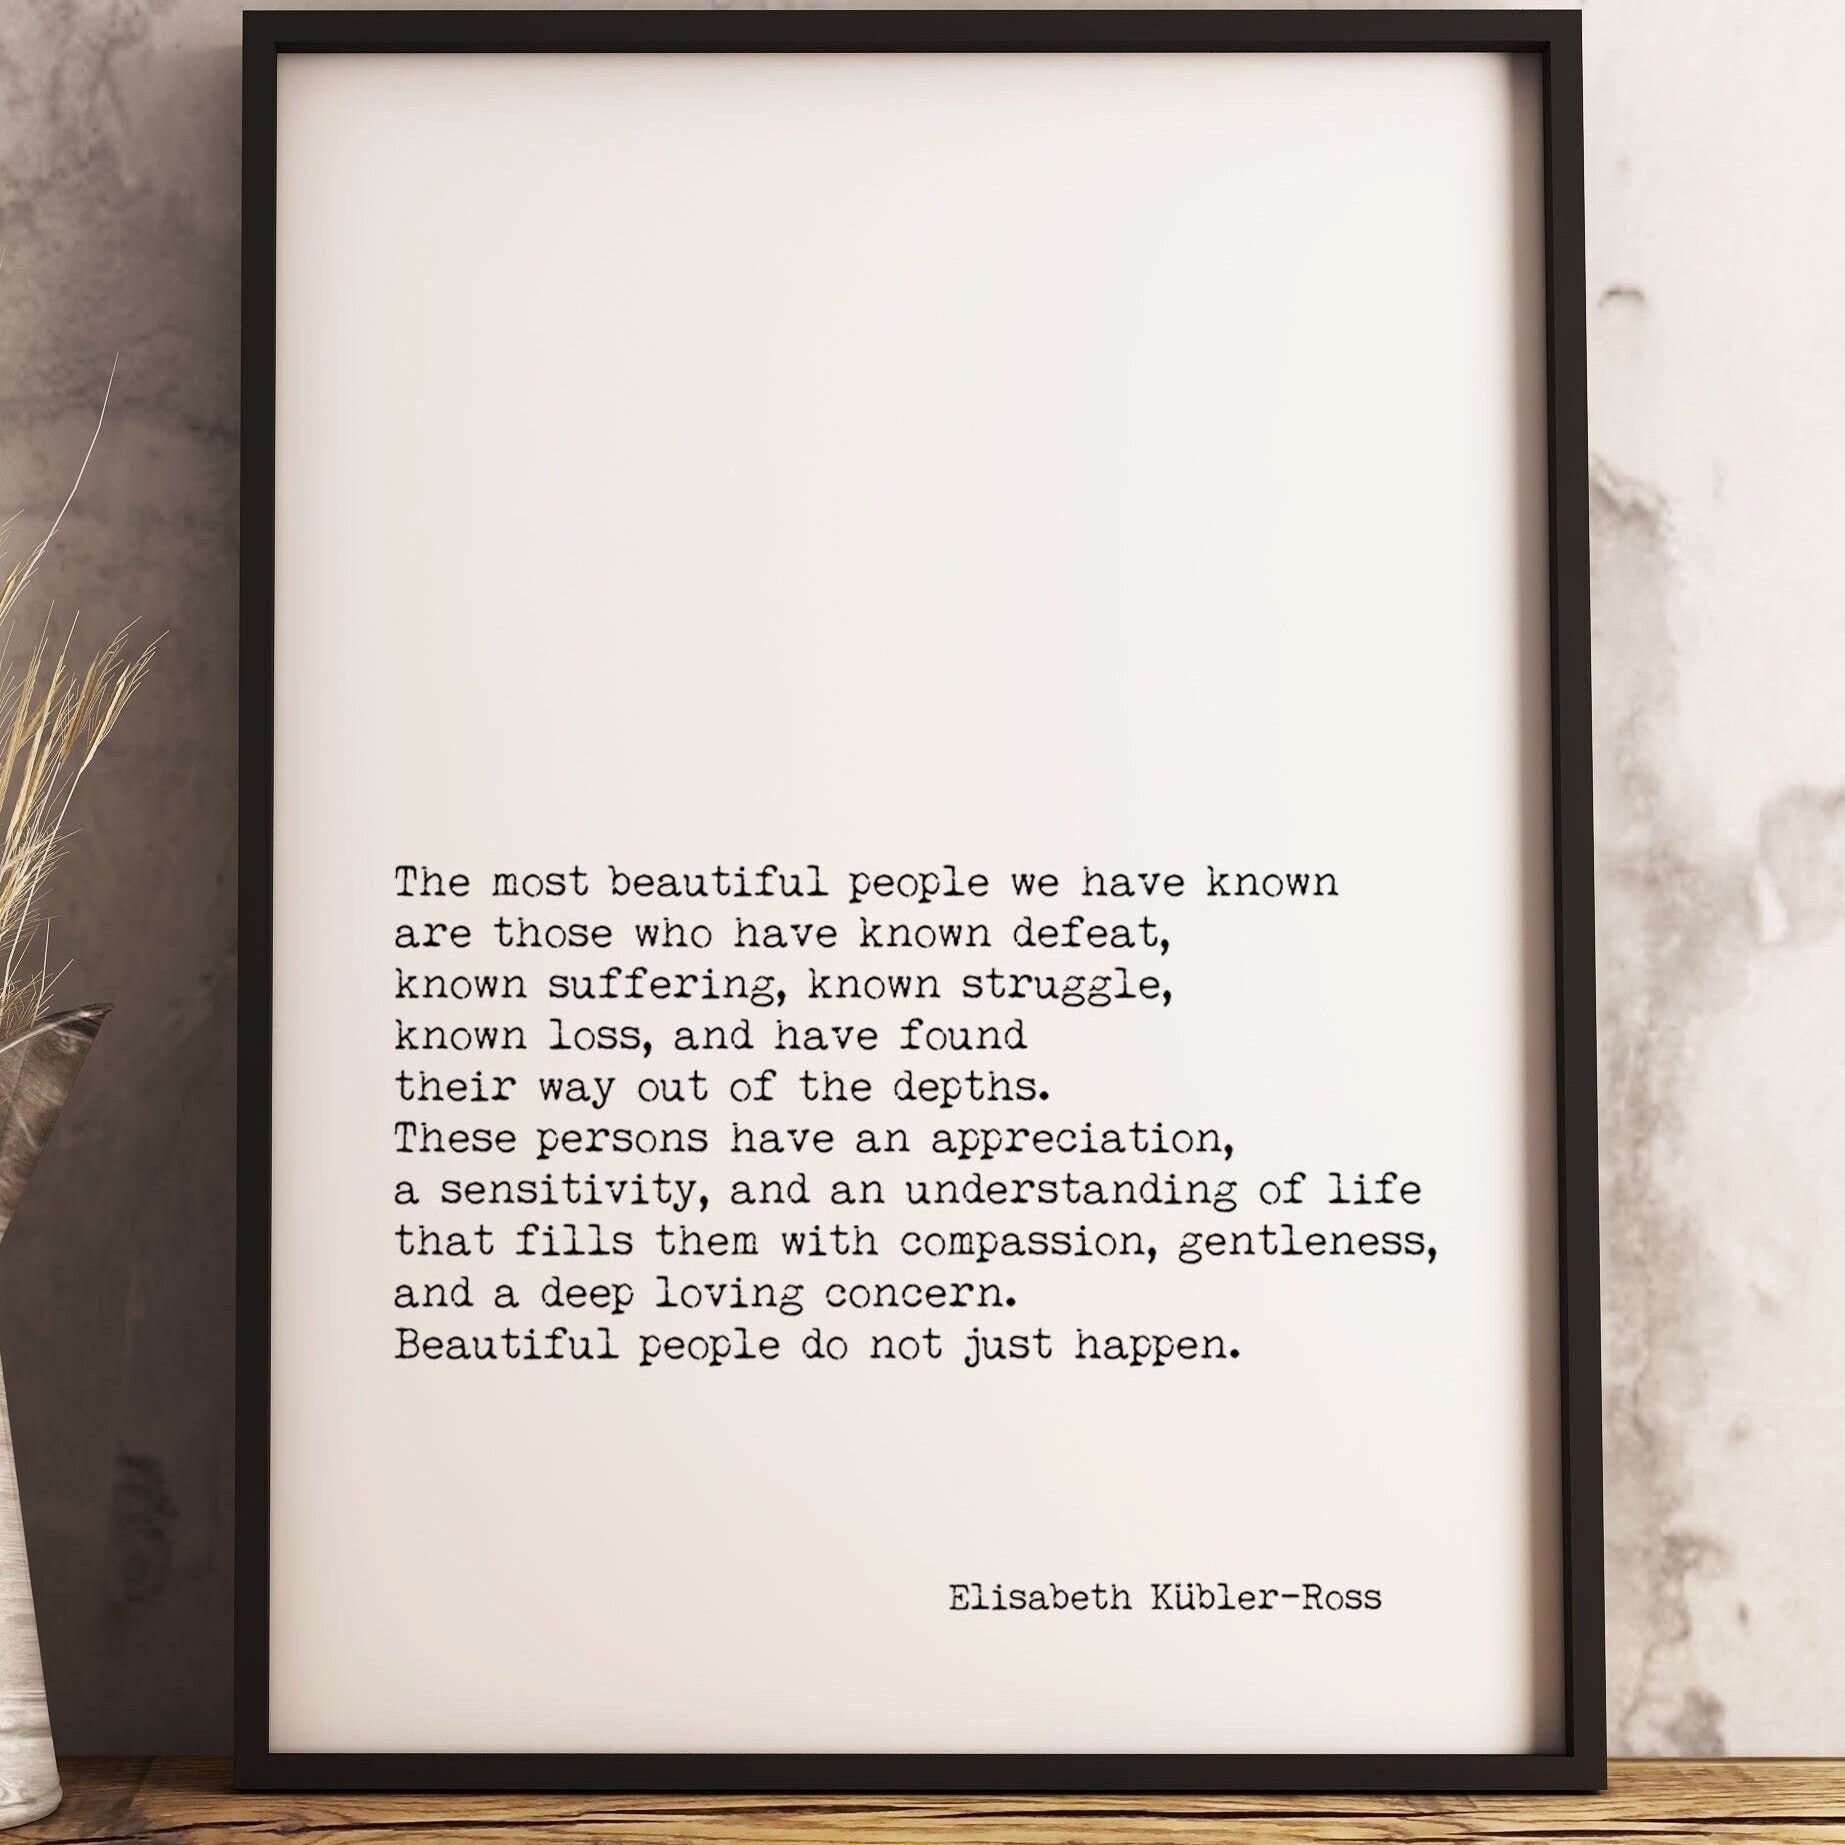 Elisabeth Kubler-Ross Framed Art Quote Most Beautiful People Quote in Black & White for Home Wall Decor